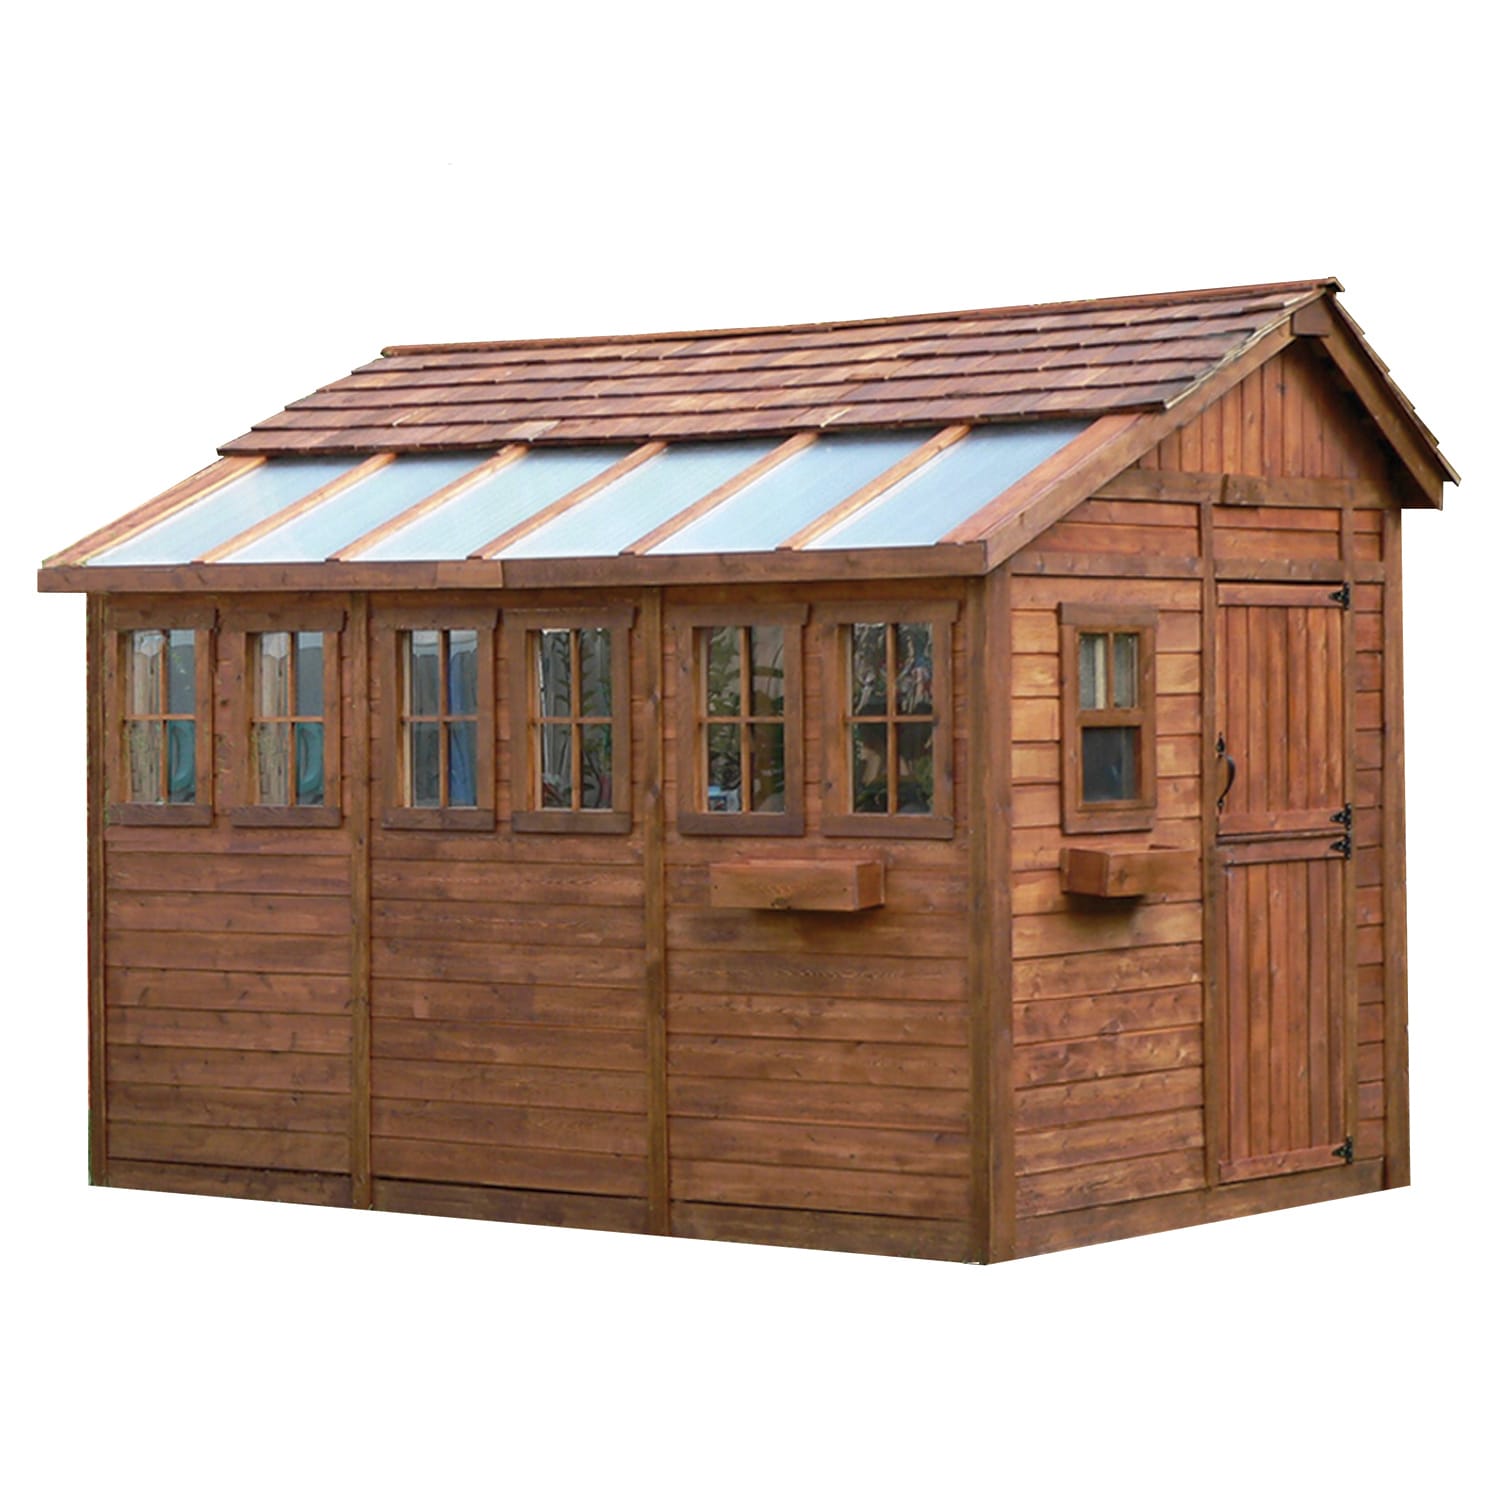  backyard sheds for sale at lowes wiring